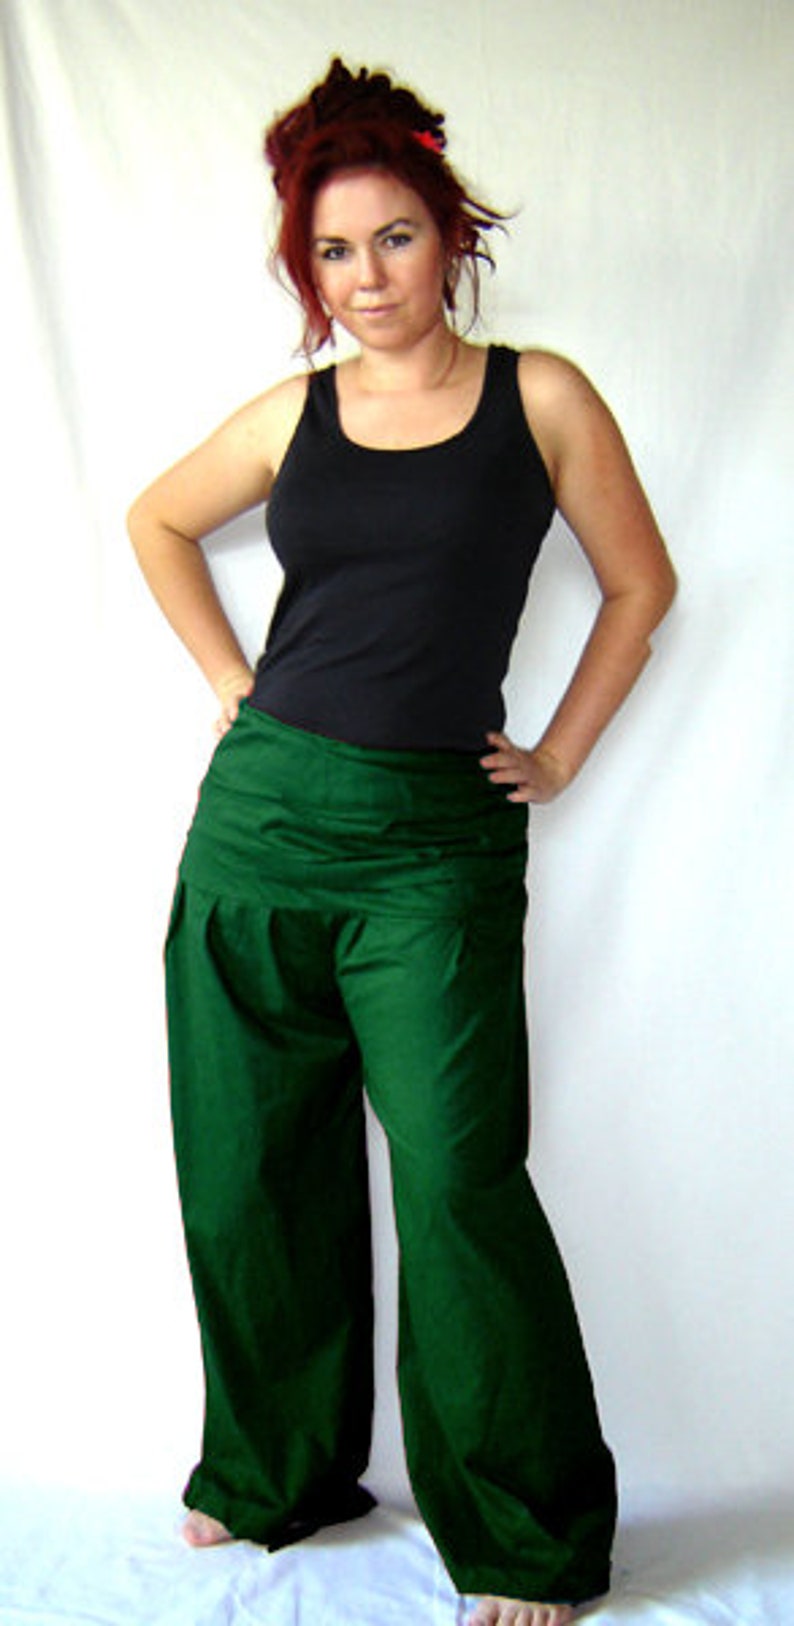 Pleated trousers wide waistband dark green green pants kissagato S M L XL image 2